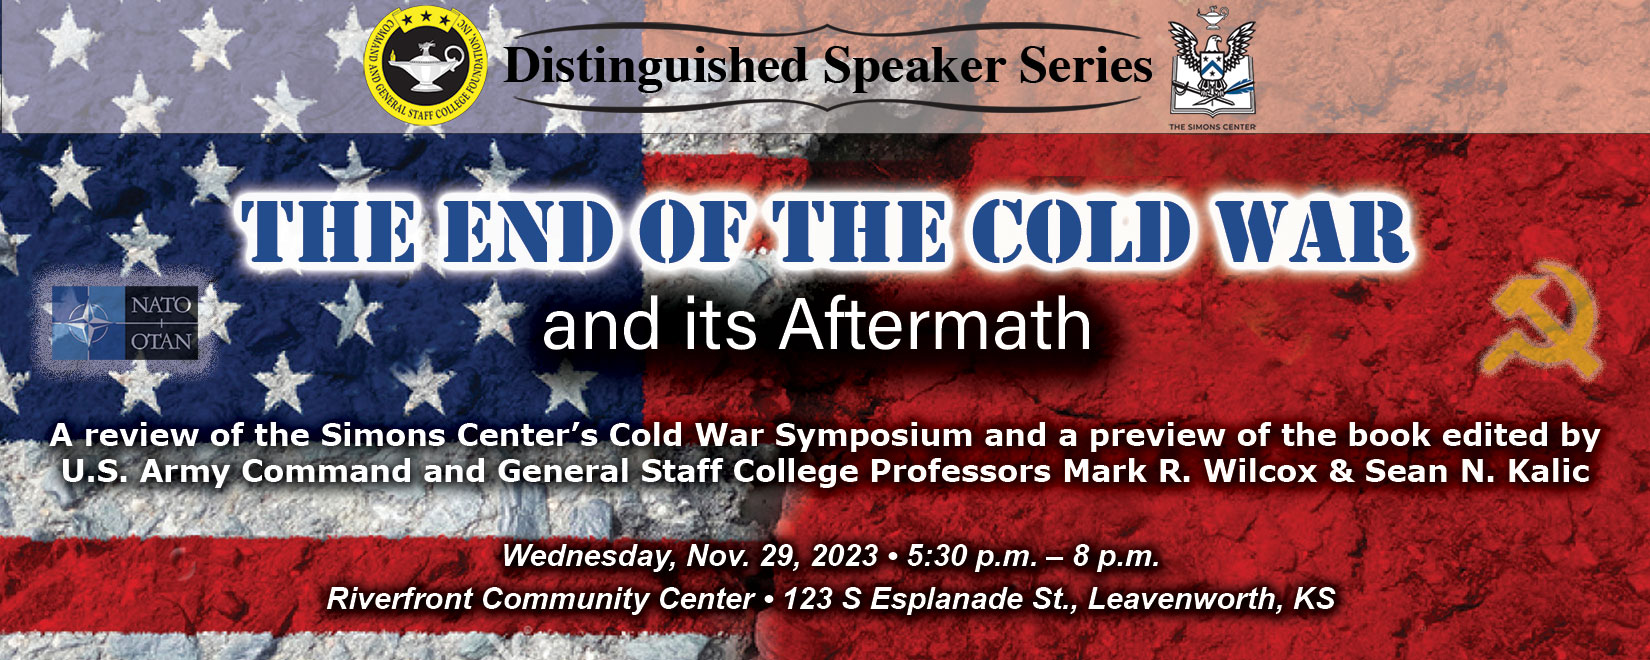 Composite image with US and Russian flags in the background. Over the background is the Distinguished Speaker Series logo above the title and date of the event: "The End of the Cold War and its Aftermath -- a review of the symposium and preview of the book. – Nov. 29, 2023